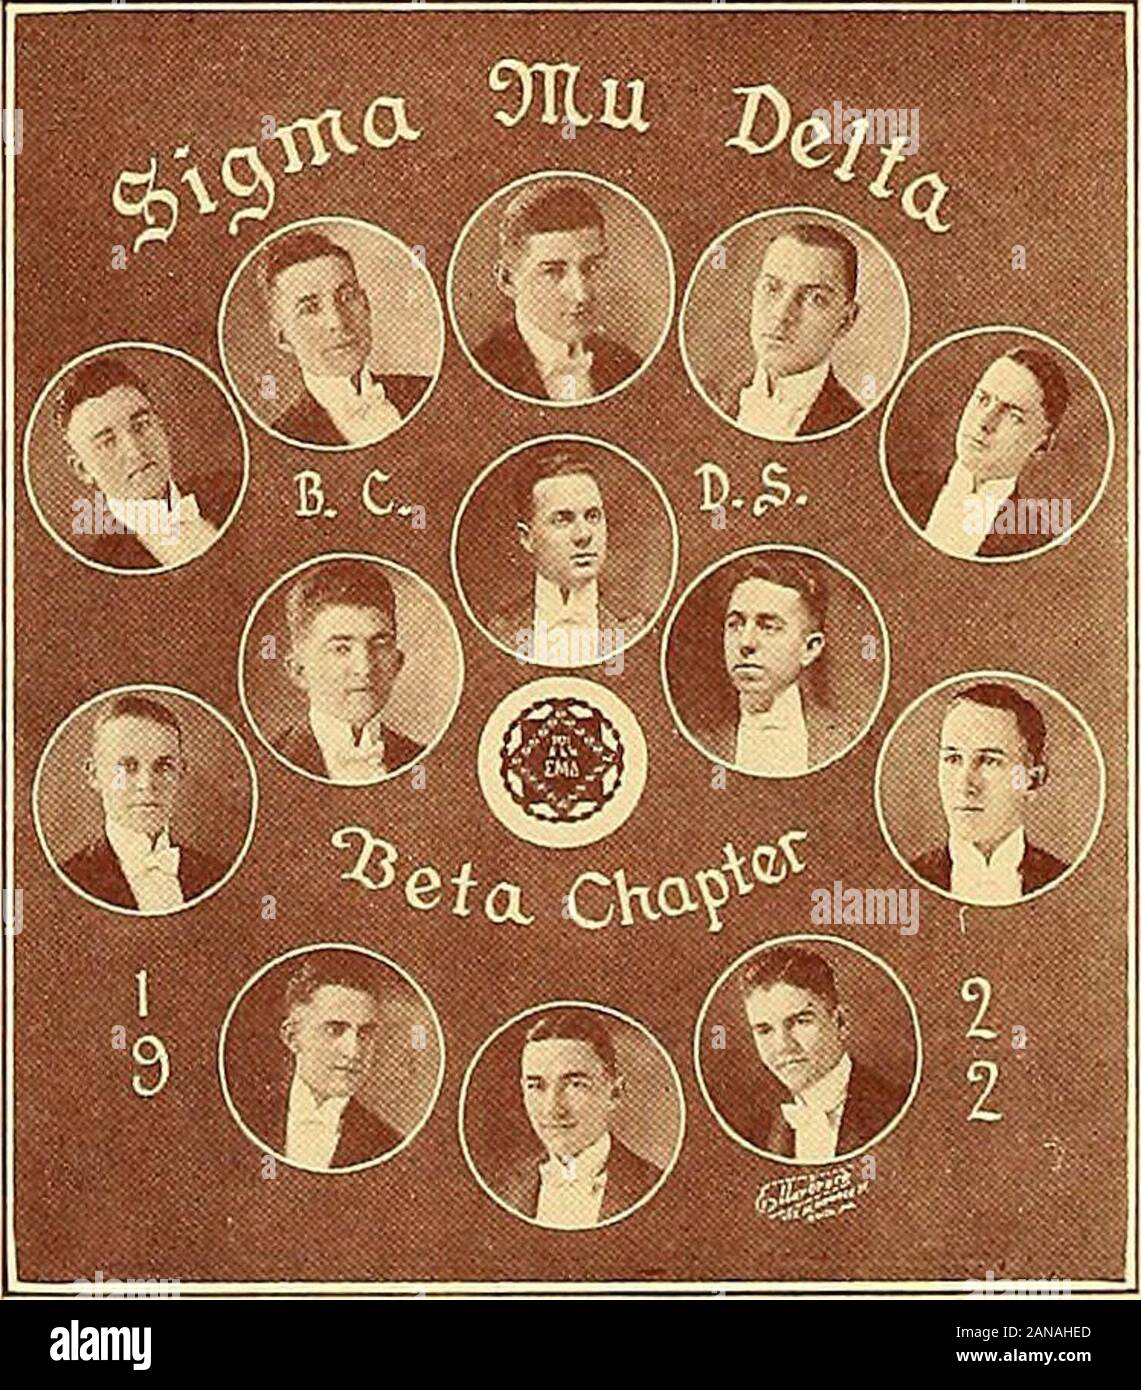 Mirror 1922 : Baltimore College of Dental Surgery . 121. 122 Sigma Mu Delta—Beta Chapter Publications Flower Colors Secret—-The Key White Caknation Black and Old Gold Annual—The Chain OFFICERS Glenn Carter Grand Master George H. Bissett Junior Grand Master J. H. Higinbotham Grand Scribe F. M. Bump Grand Chancellor of the Exchequer B. E. Simons Grand Guard of Doors M. M. Harris Grand Initiator and Conductor H. L. Gaston Grand Chairman of Trust F. V. SWEARINGEN Grand Editor and Historian FACULTY MEMBERSDr. G. B. Jersin Dr. L. M. B. Koontz Dr. E. G. Gail Dr. H. T. Hicks HONORARY MEMBERS Laco W. G Stock Photo